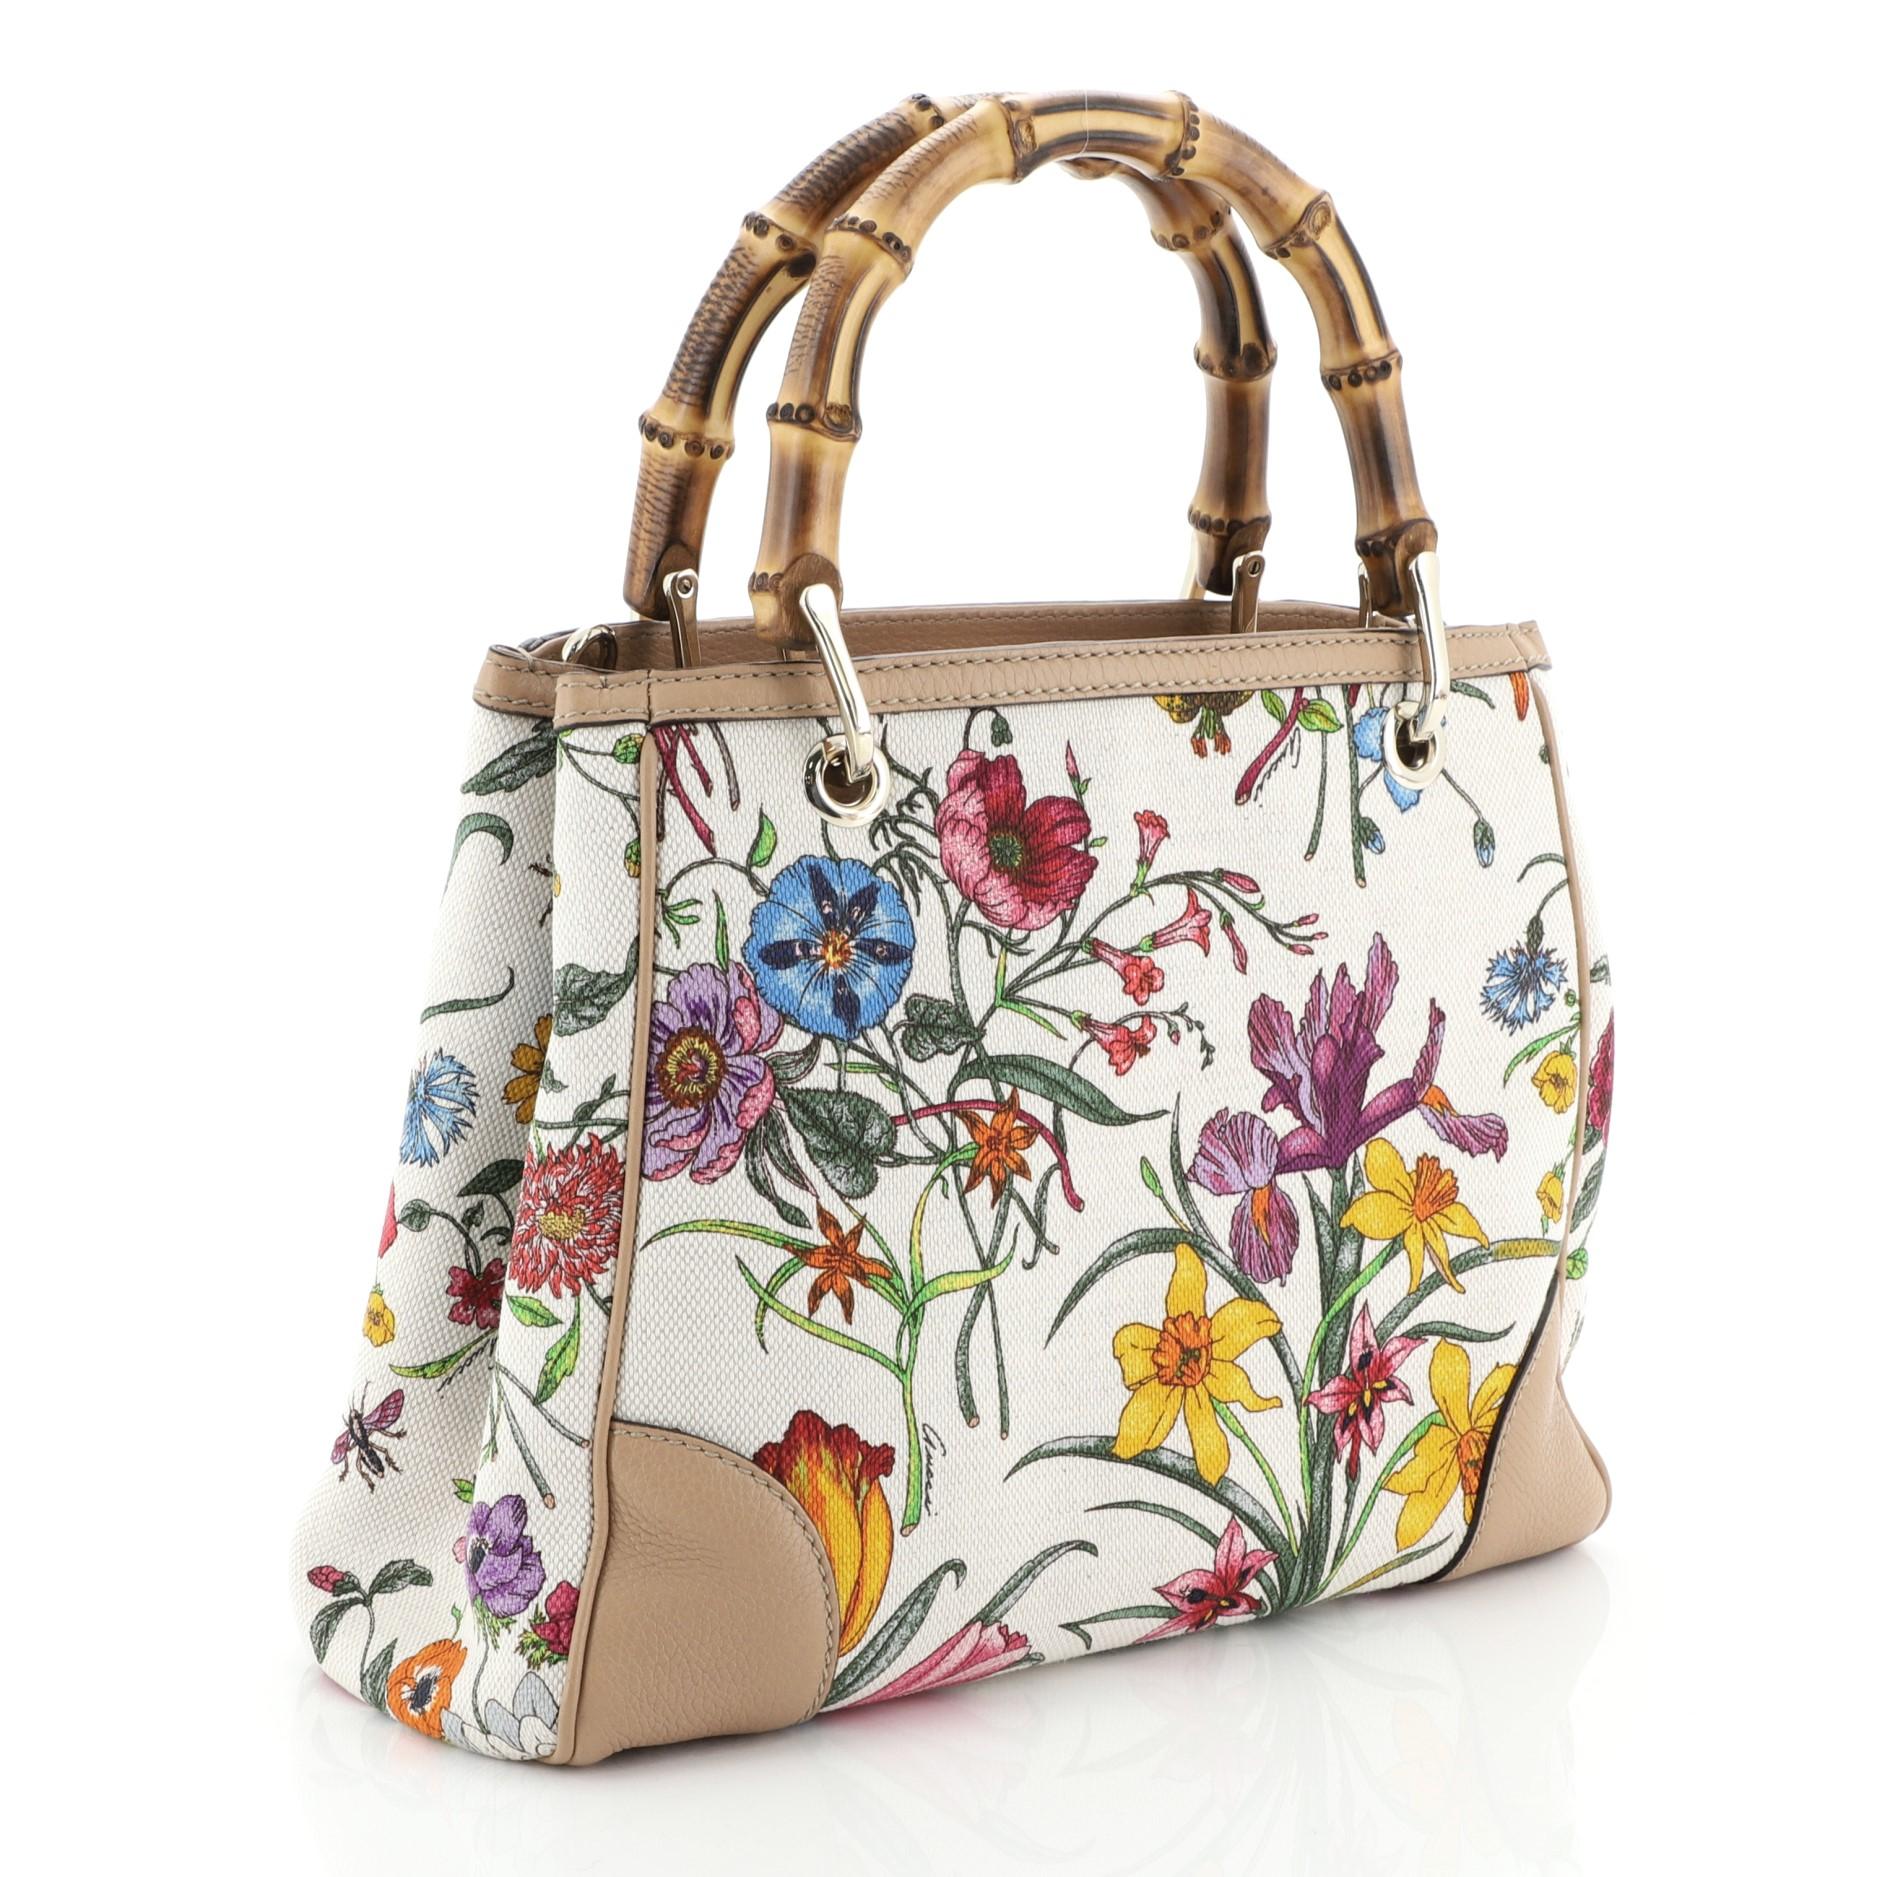 This Gucci Bamboo Shopper Tote Flora Canvas Small, crafted in neutral printed canvas, features dual bamboo handles and gold-tone hardware. Its hidden magnetic snap closure opens to a neutral fabric interior divided into two compartments with side